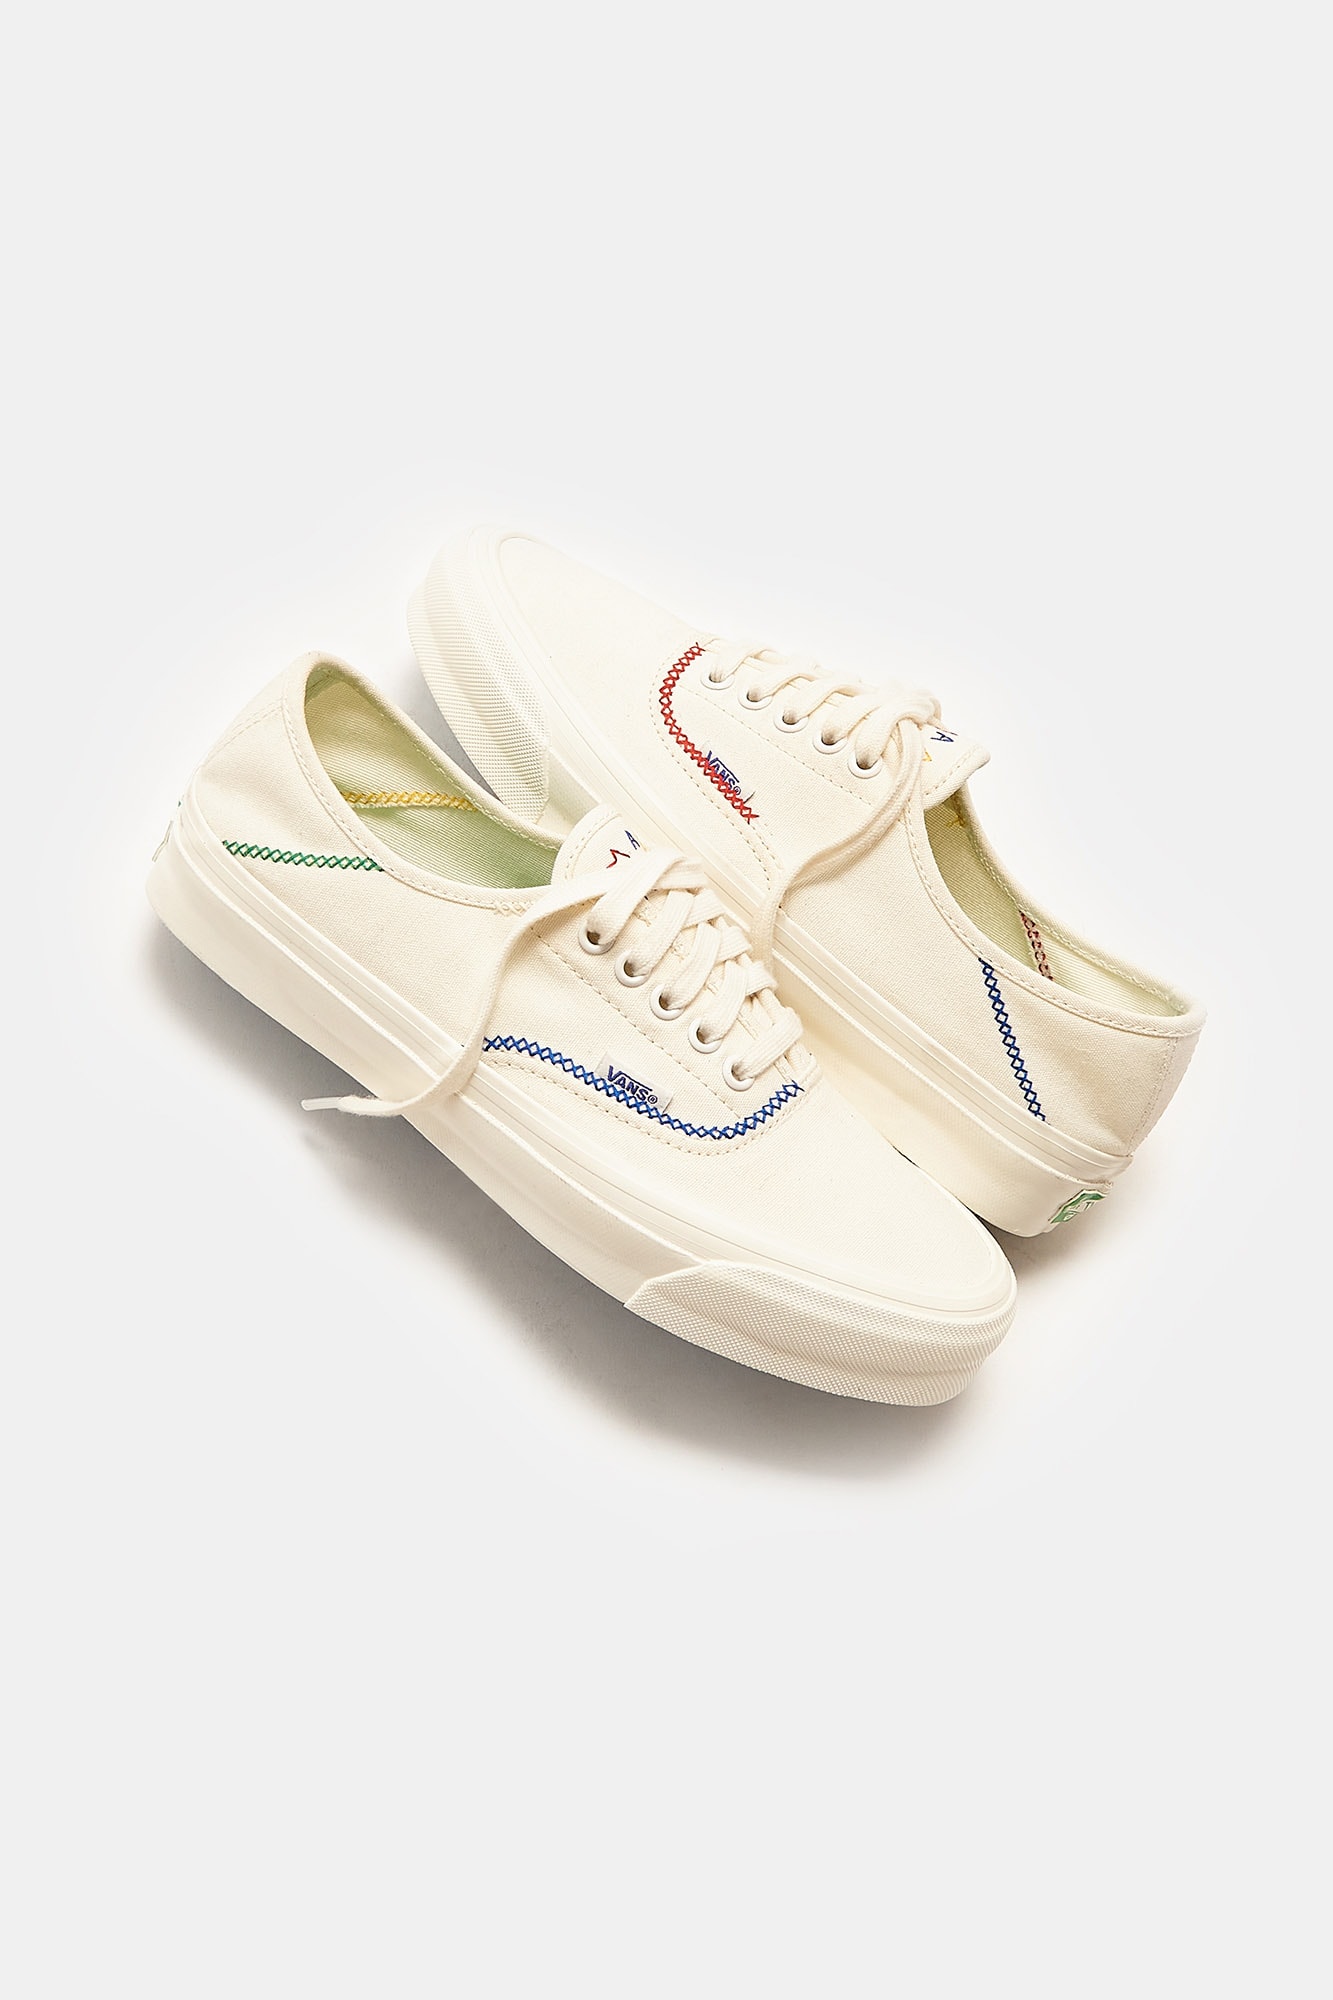 Vans x Madhappy OG Style 43 LX Collaboration Footwear Lifestyle Brand